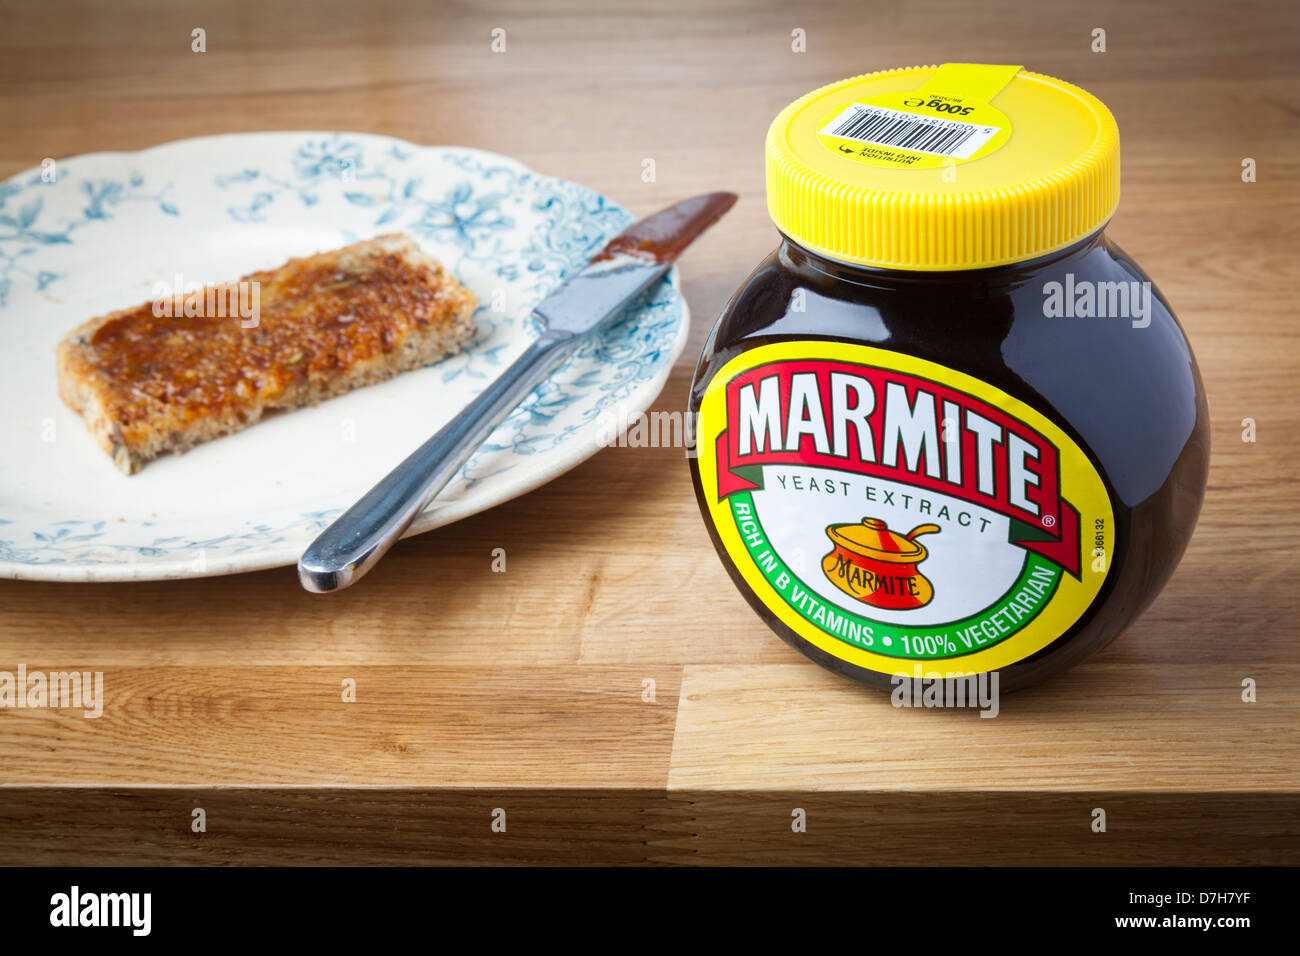 Bath, UK - September 25, 2011: A pot of Marmite on a wooden kitchen surface with toast in the background. Stock Photo